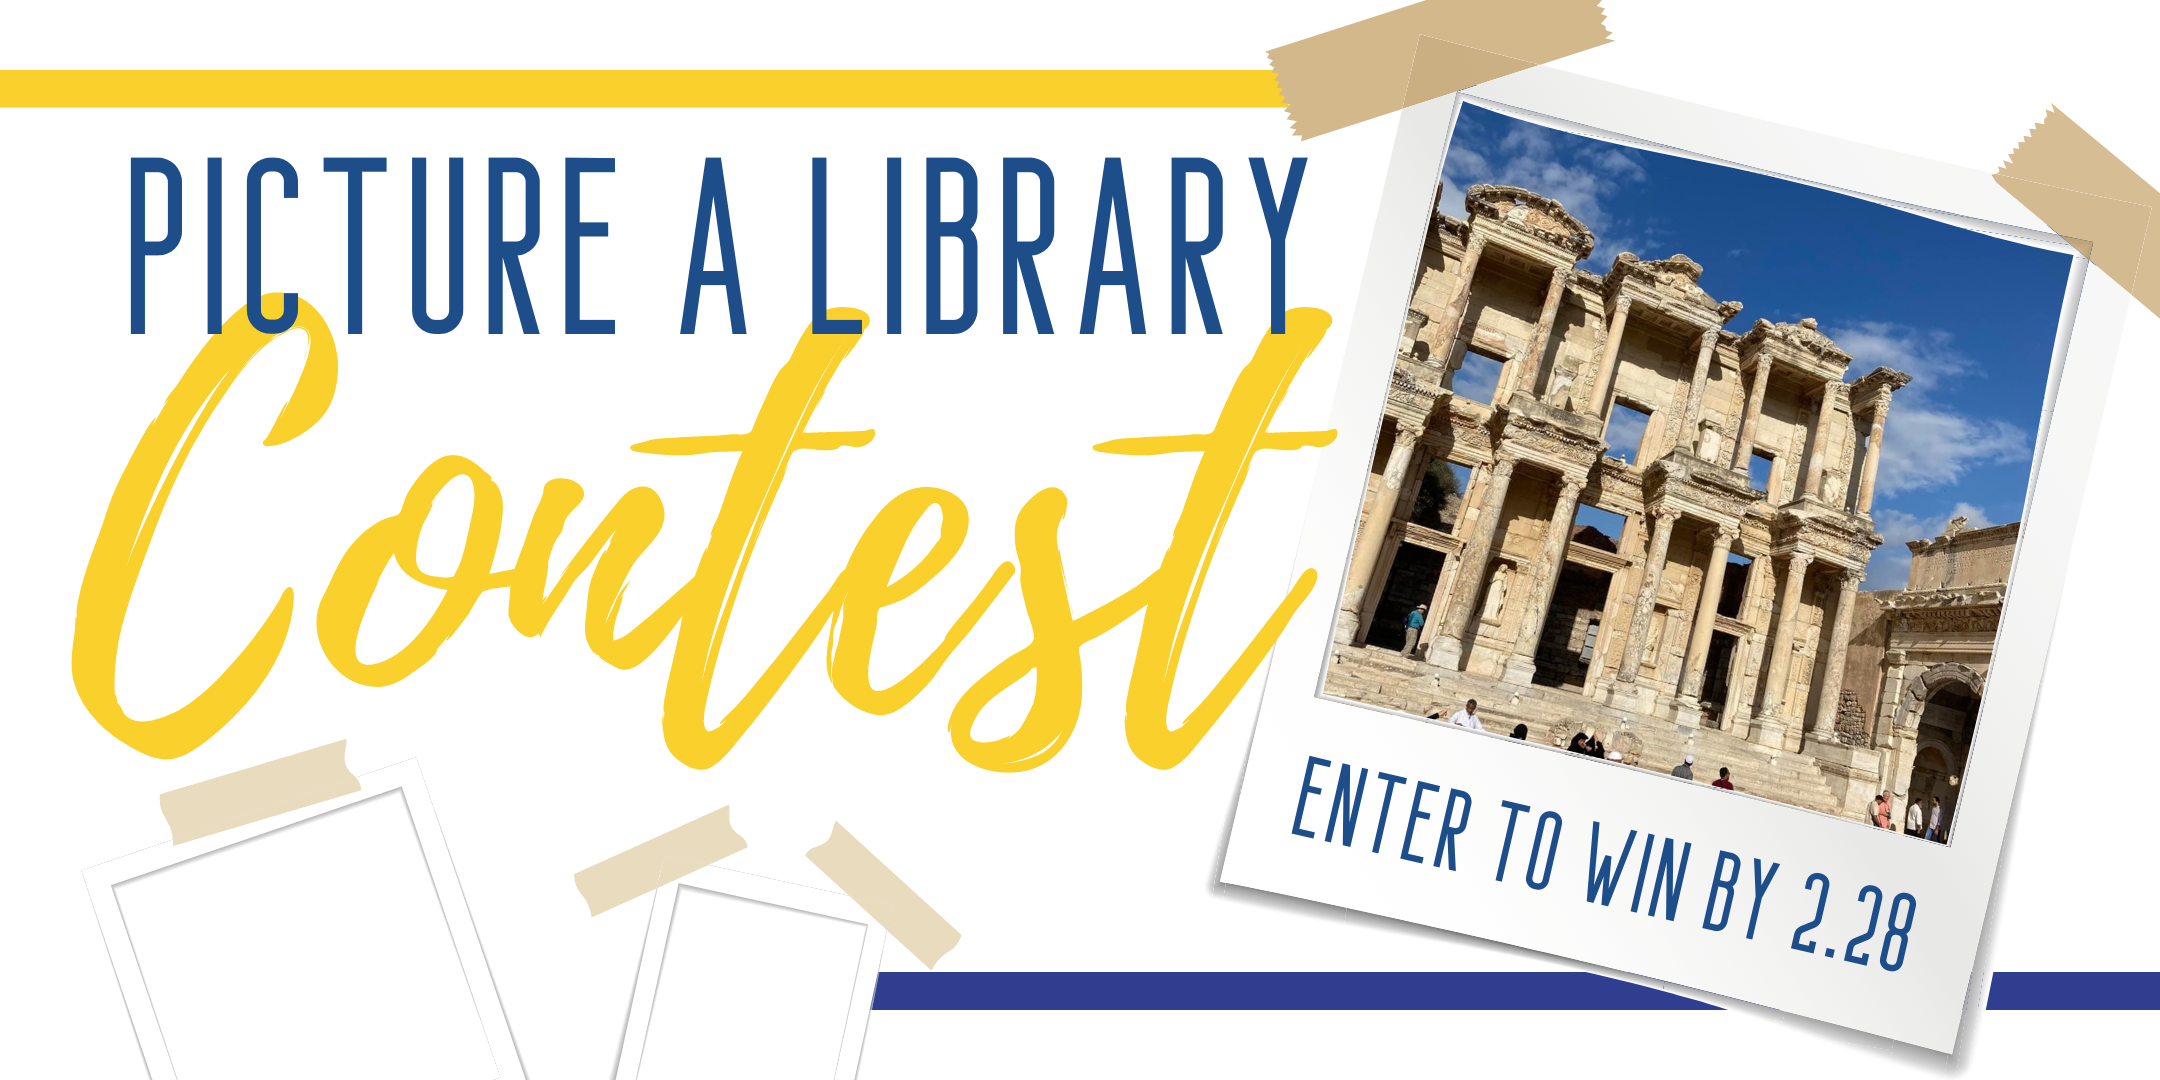 image of "Picture a Library Contest"